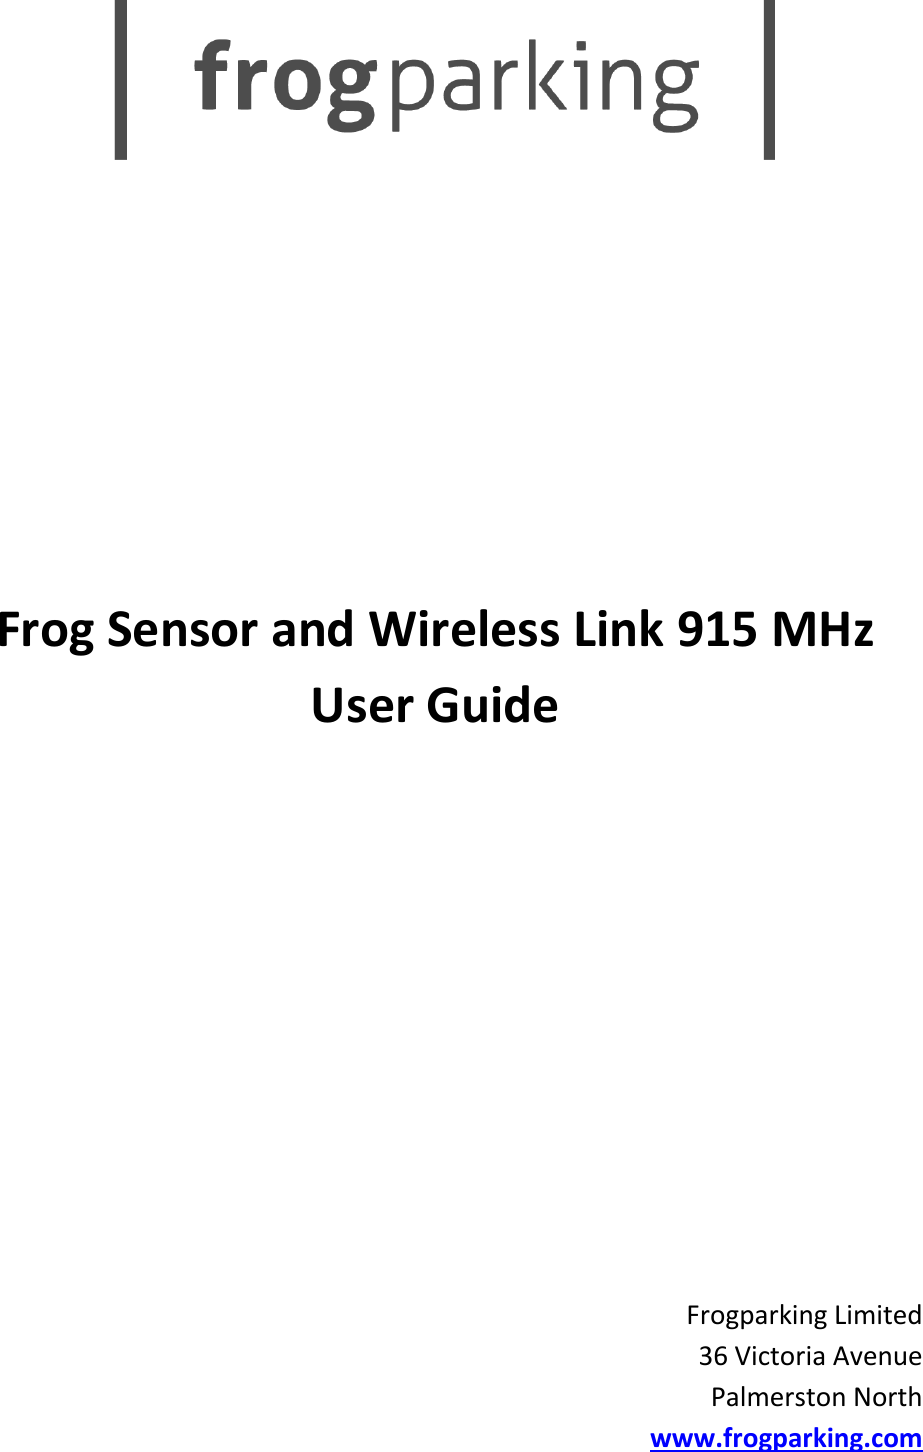            Frog Sensor and Wireless Link 915 MHz User Guide           Frogparking Limited 36 Victoria Avenue Palmerston North www.frogparking.com   